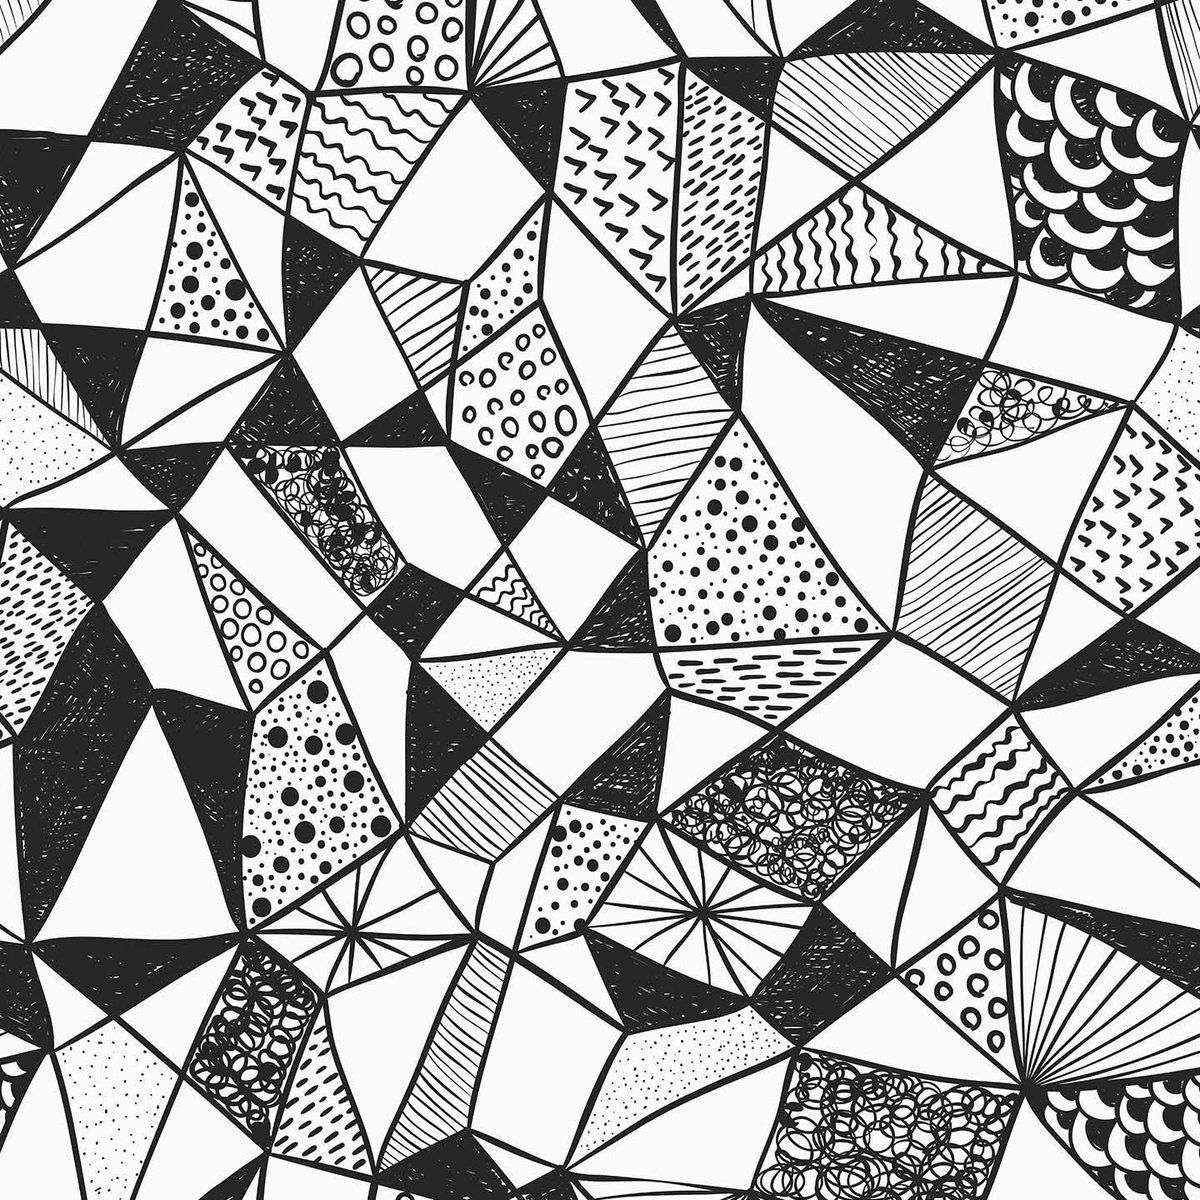 Geometric Shapes Wallpaper for Walls, Contemporary Black & White